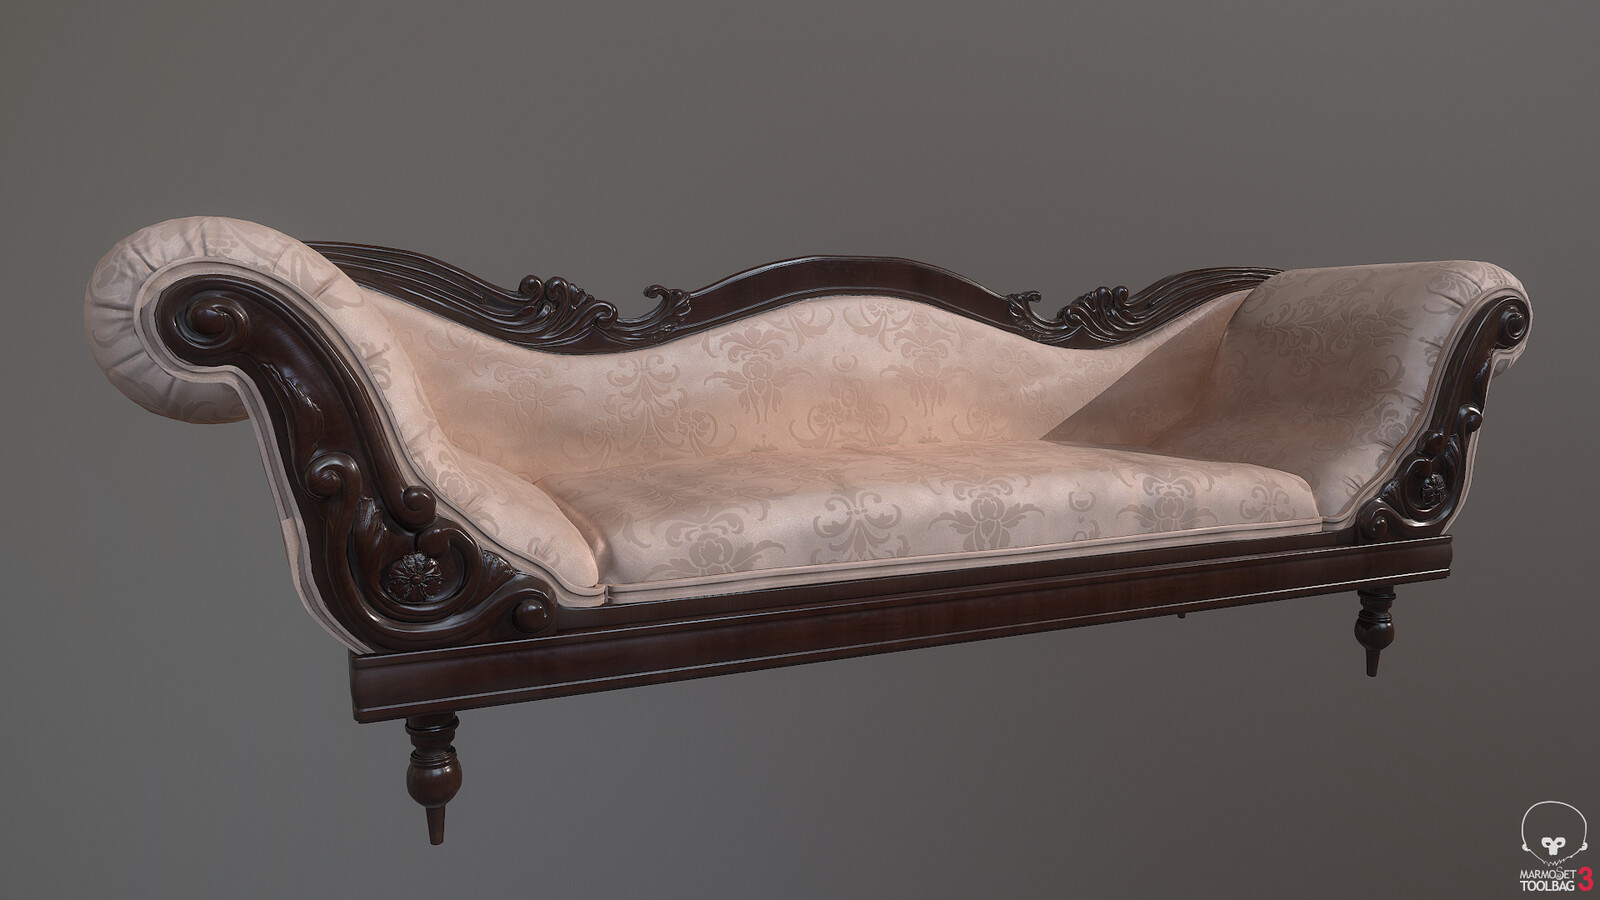 The sofa's base model was done in 3ds Max, and the sculpting was done in ZBrush. Texturing in Substance Painter.